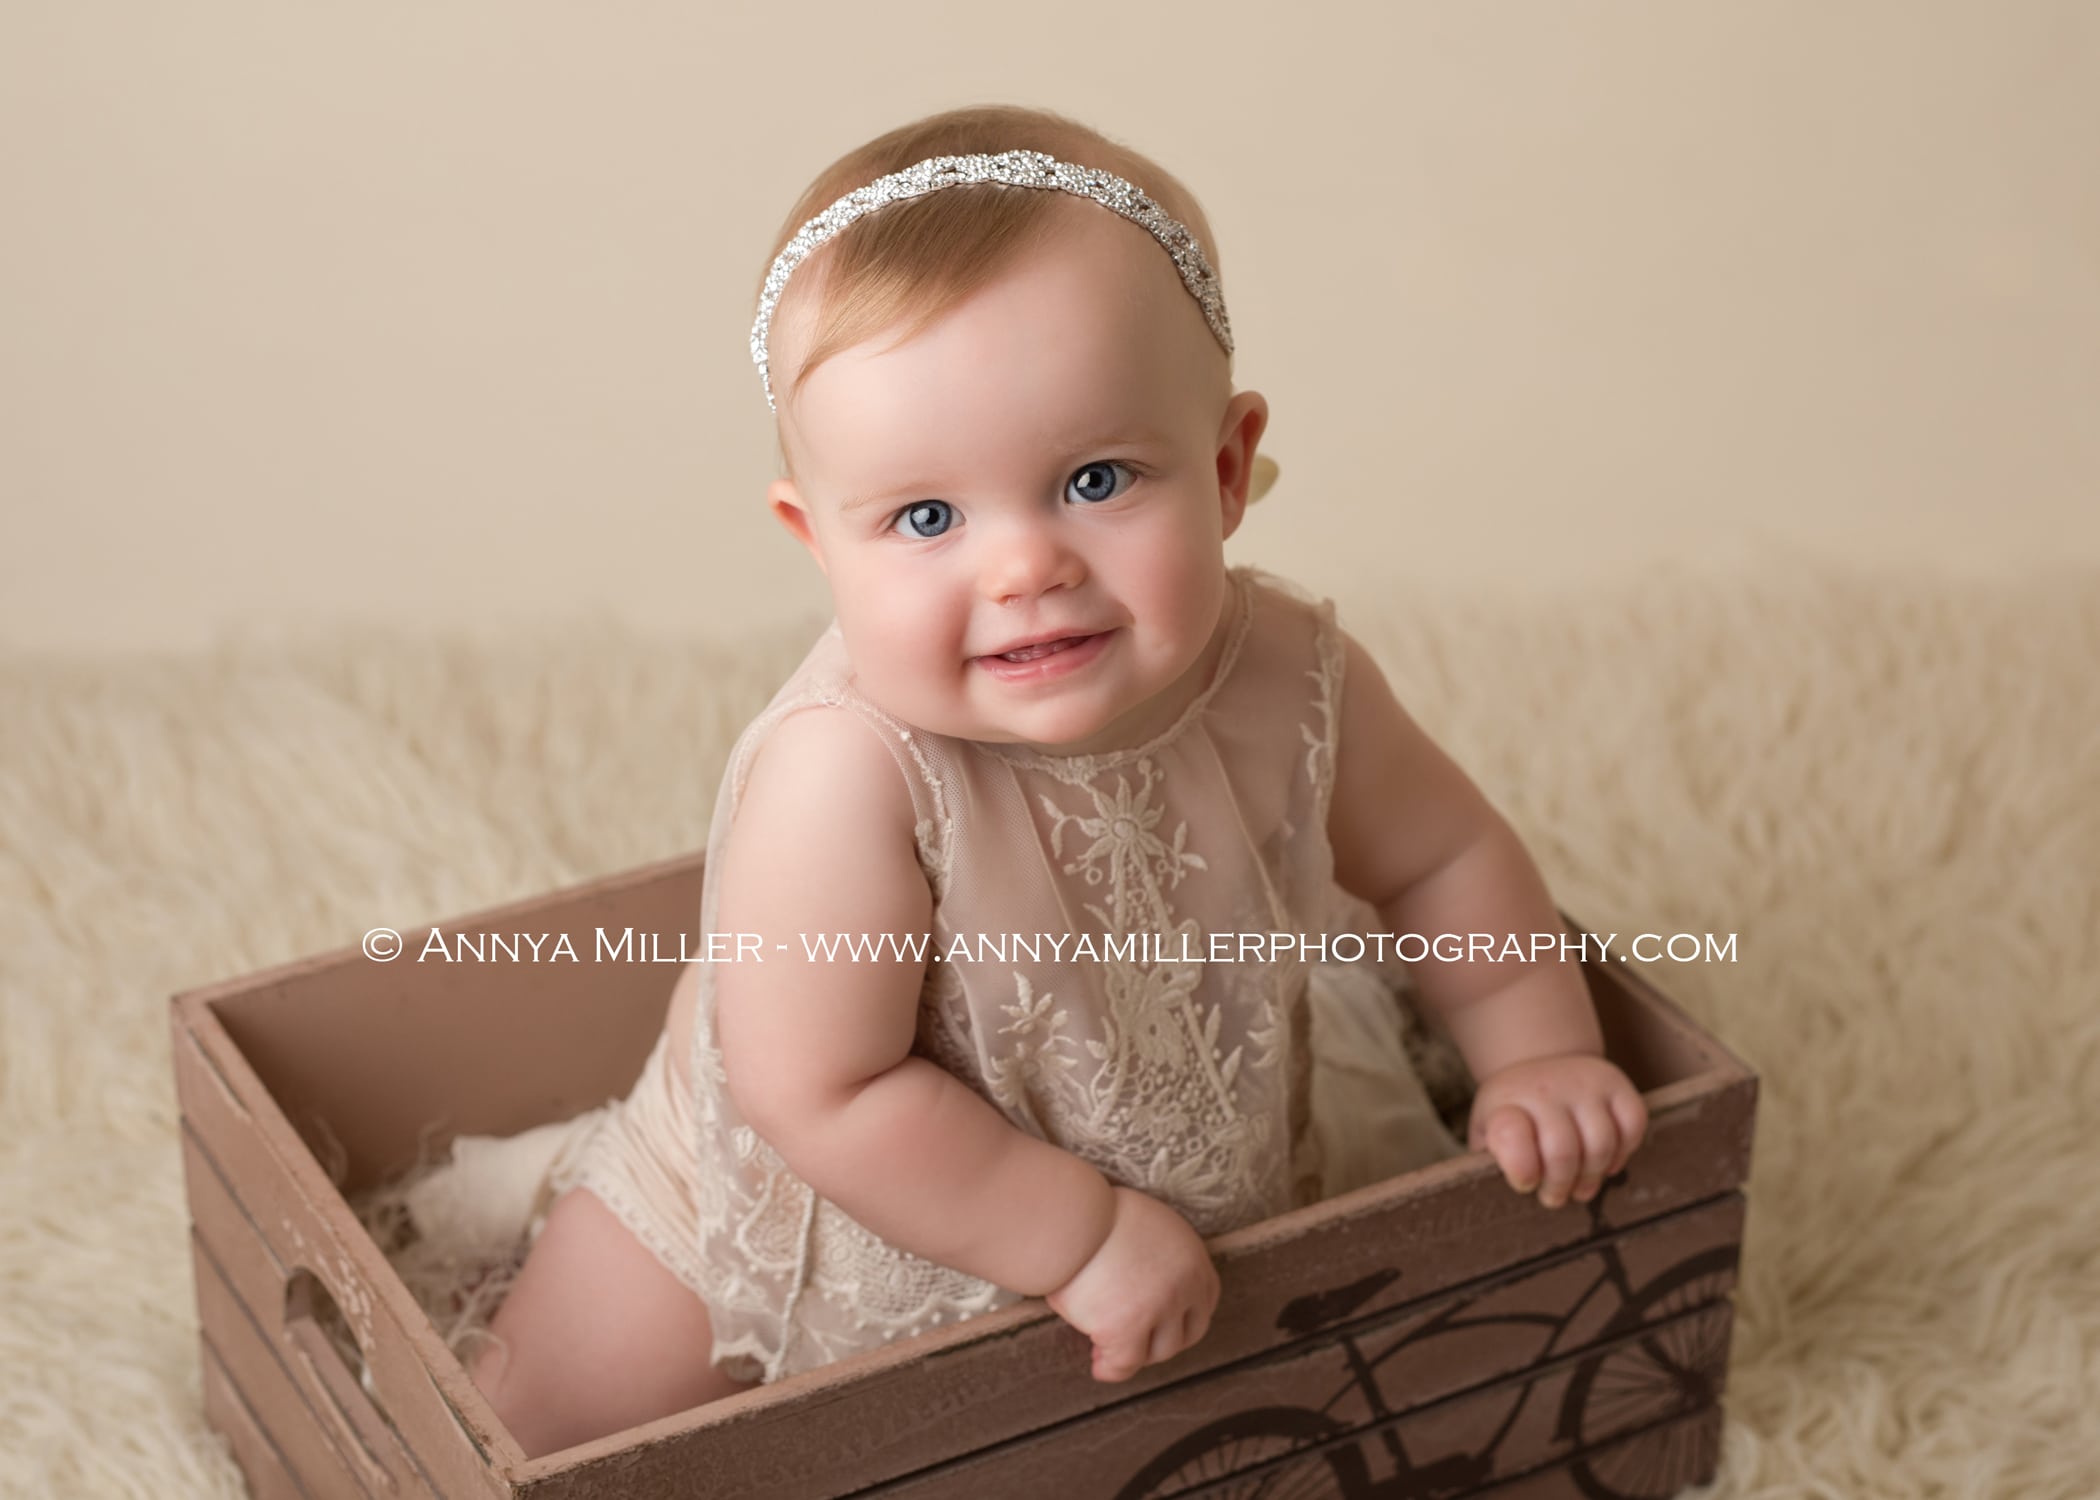 Ajax baby photography by Durham photographer Annya Miller